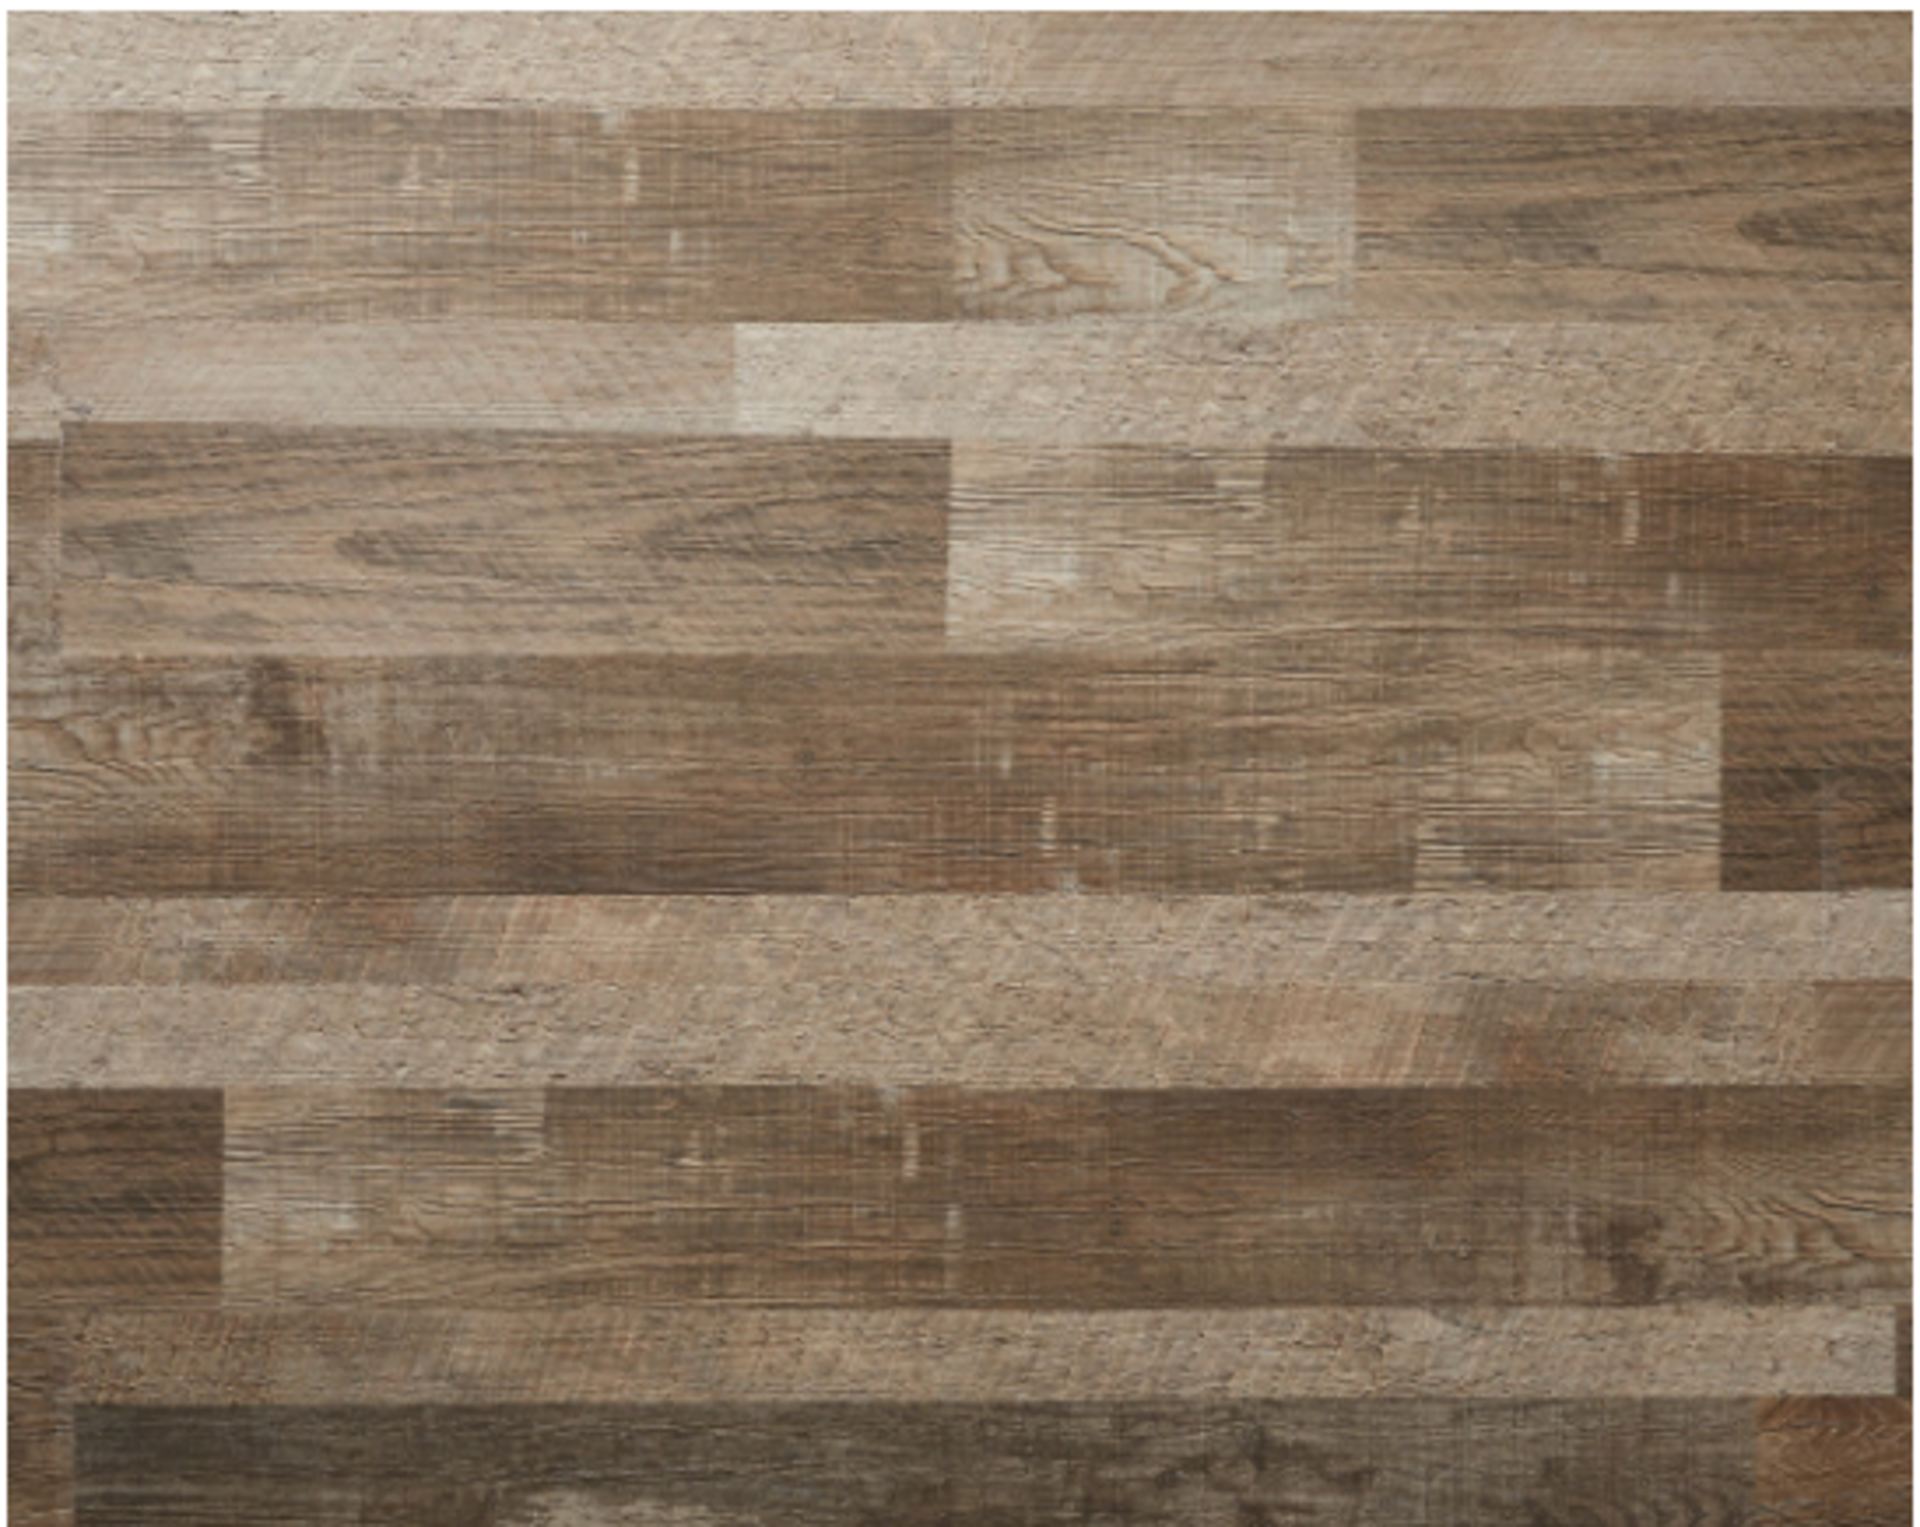 PALLET TO CONTAIN 138.24m2 OF BACHETA LUXURY VINYL CLICK PLANK FLOORING. MULTI-PLANKS BROWN. EASY TO - Image 2 of 4